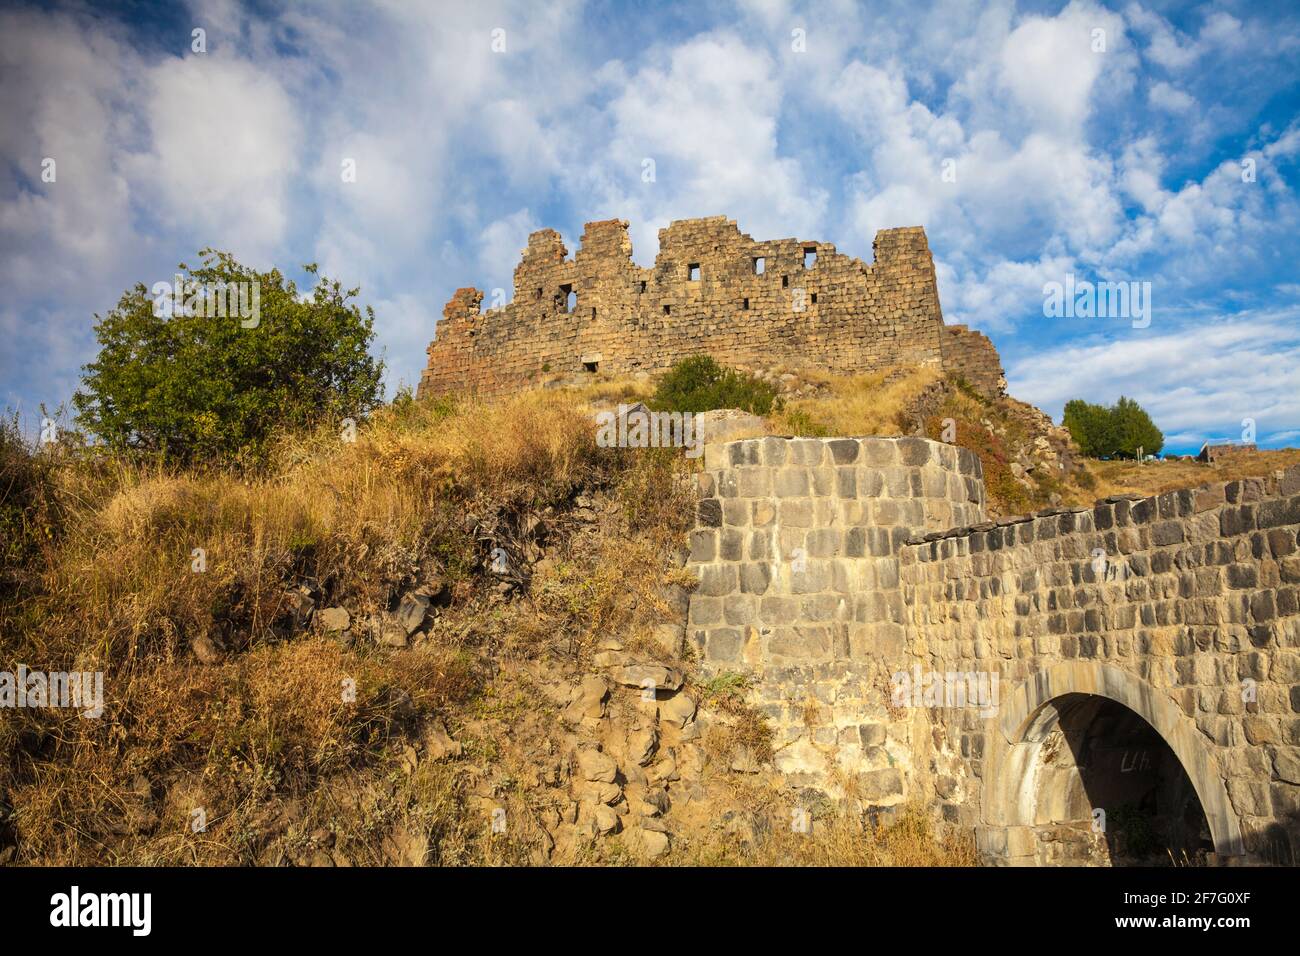 Armenia, Aragatsotn, Yerevan, Amberd fortress located on the slopes of Mount Aragat Stock Photo